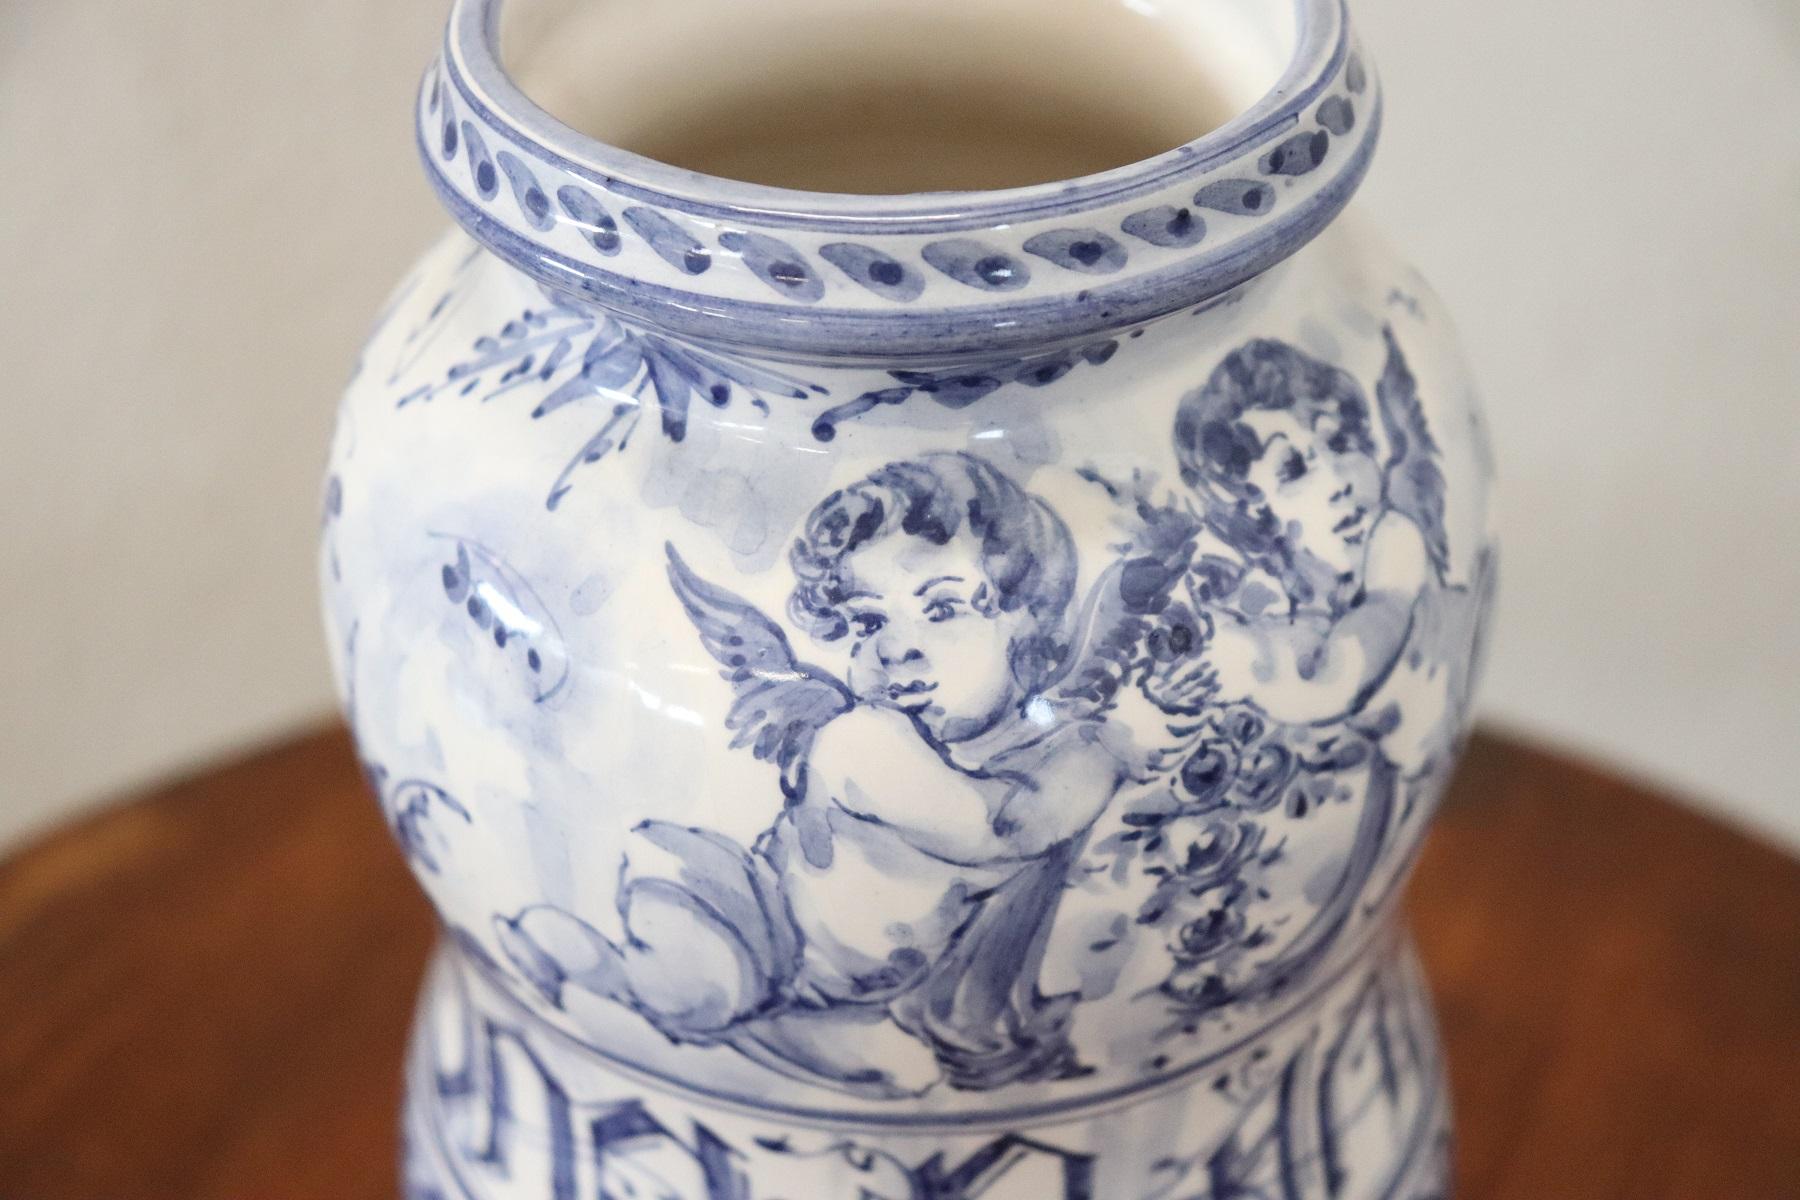 Beautiful vase in polychrome ceramic decorated by hand in shades of blue. Classical taste decoration with cherubs. This is a collectible ceramic.
Biographical Note
Lino Grosso (1915-1995), descendant of a family of Albisolese potters, worked from